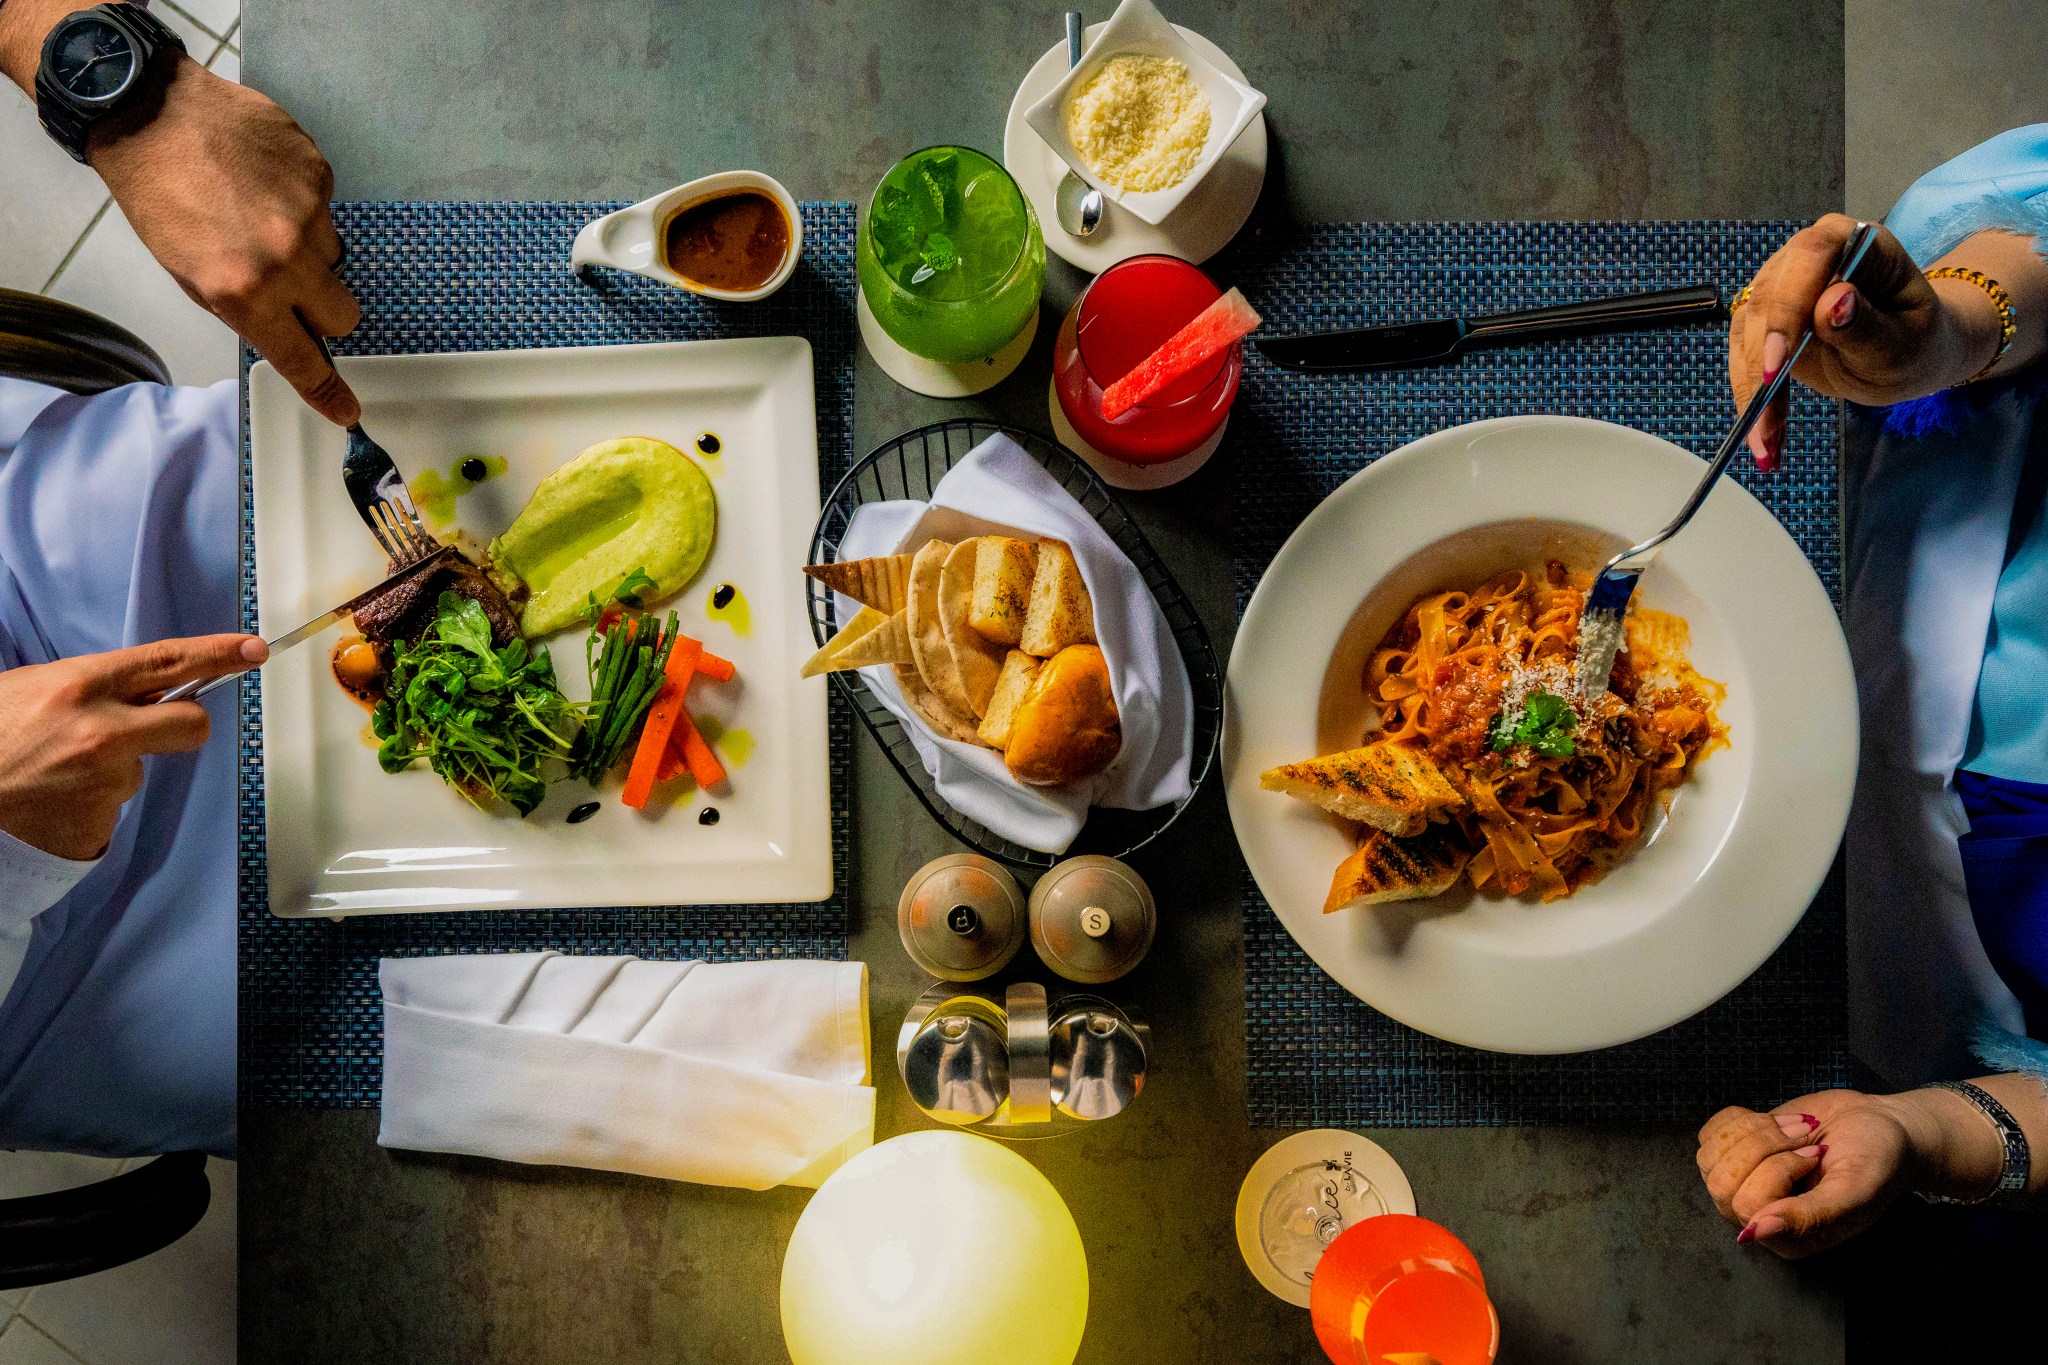 Dine at Home Delivery Service at LA VIE CLub for Muscat Hills residents